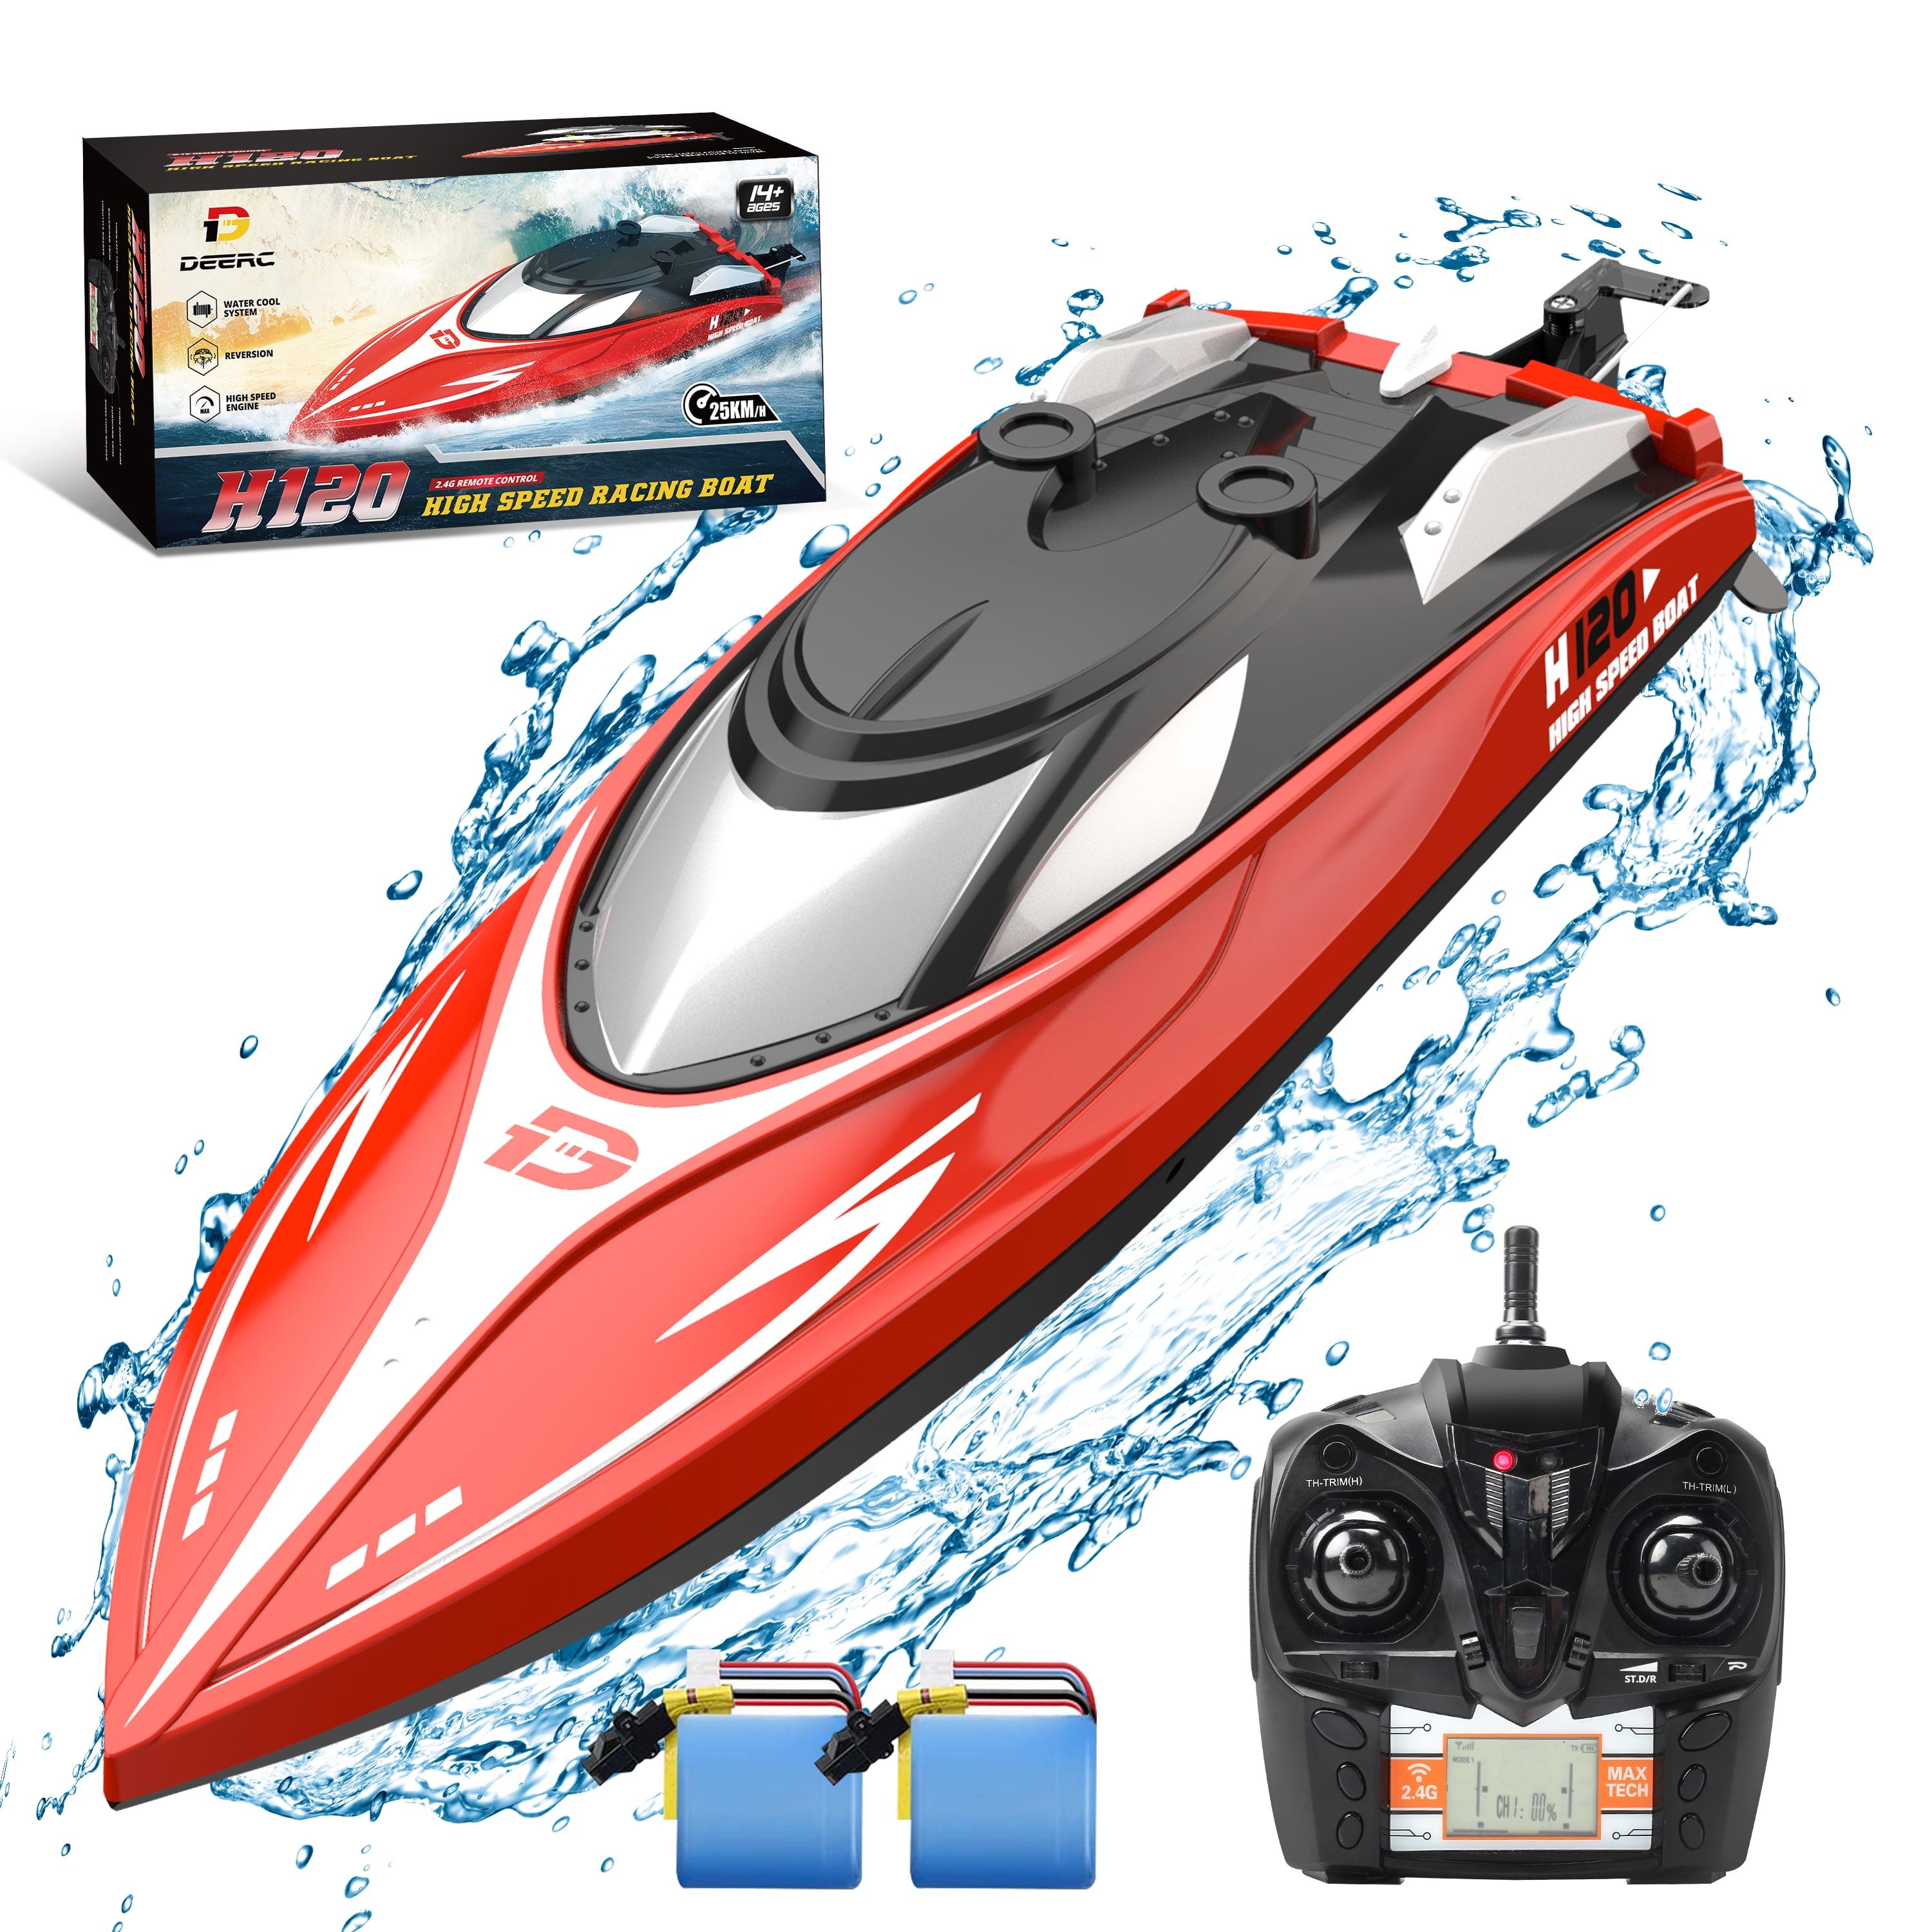 Rc Speed Boat Amazon: -Top RC Speed Boats on Amazon: Your Ultimate Guide